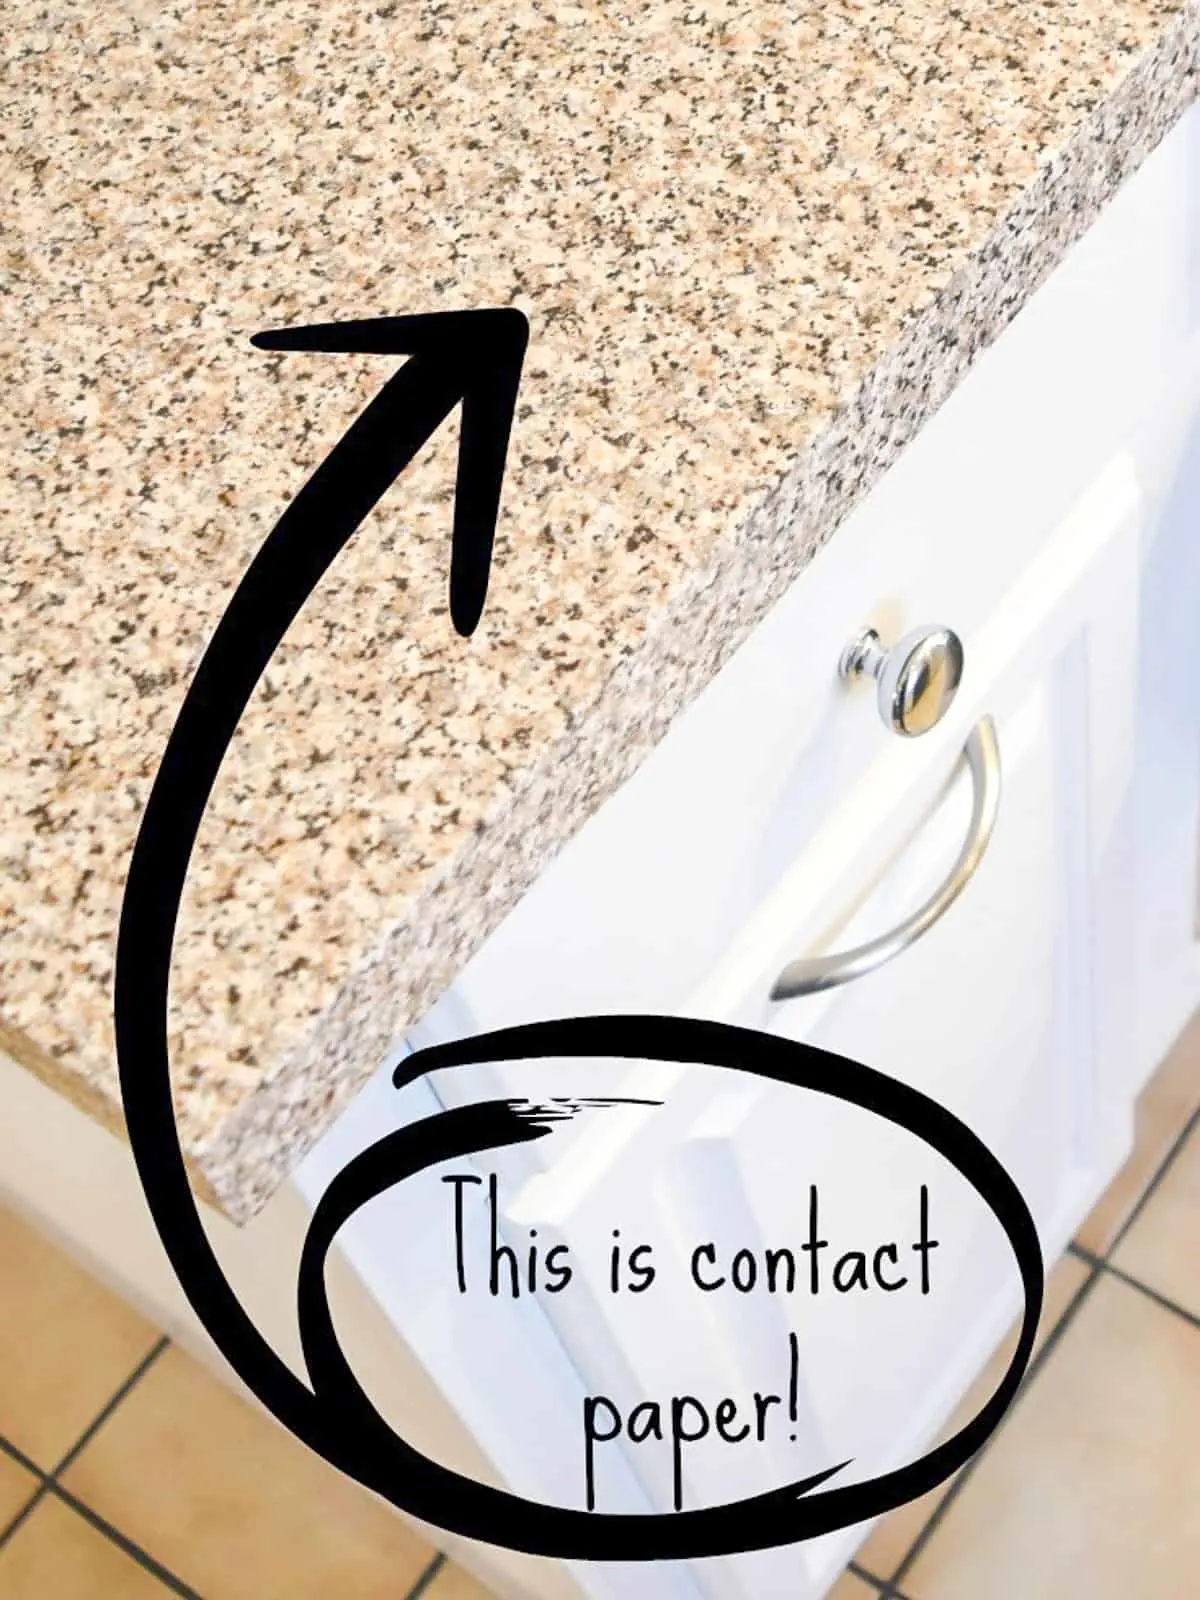 Where To Find Used Kitchen Cabinets And, Removing Old Contact Paper From Cabinets Woodwork